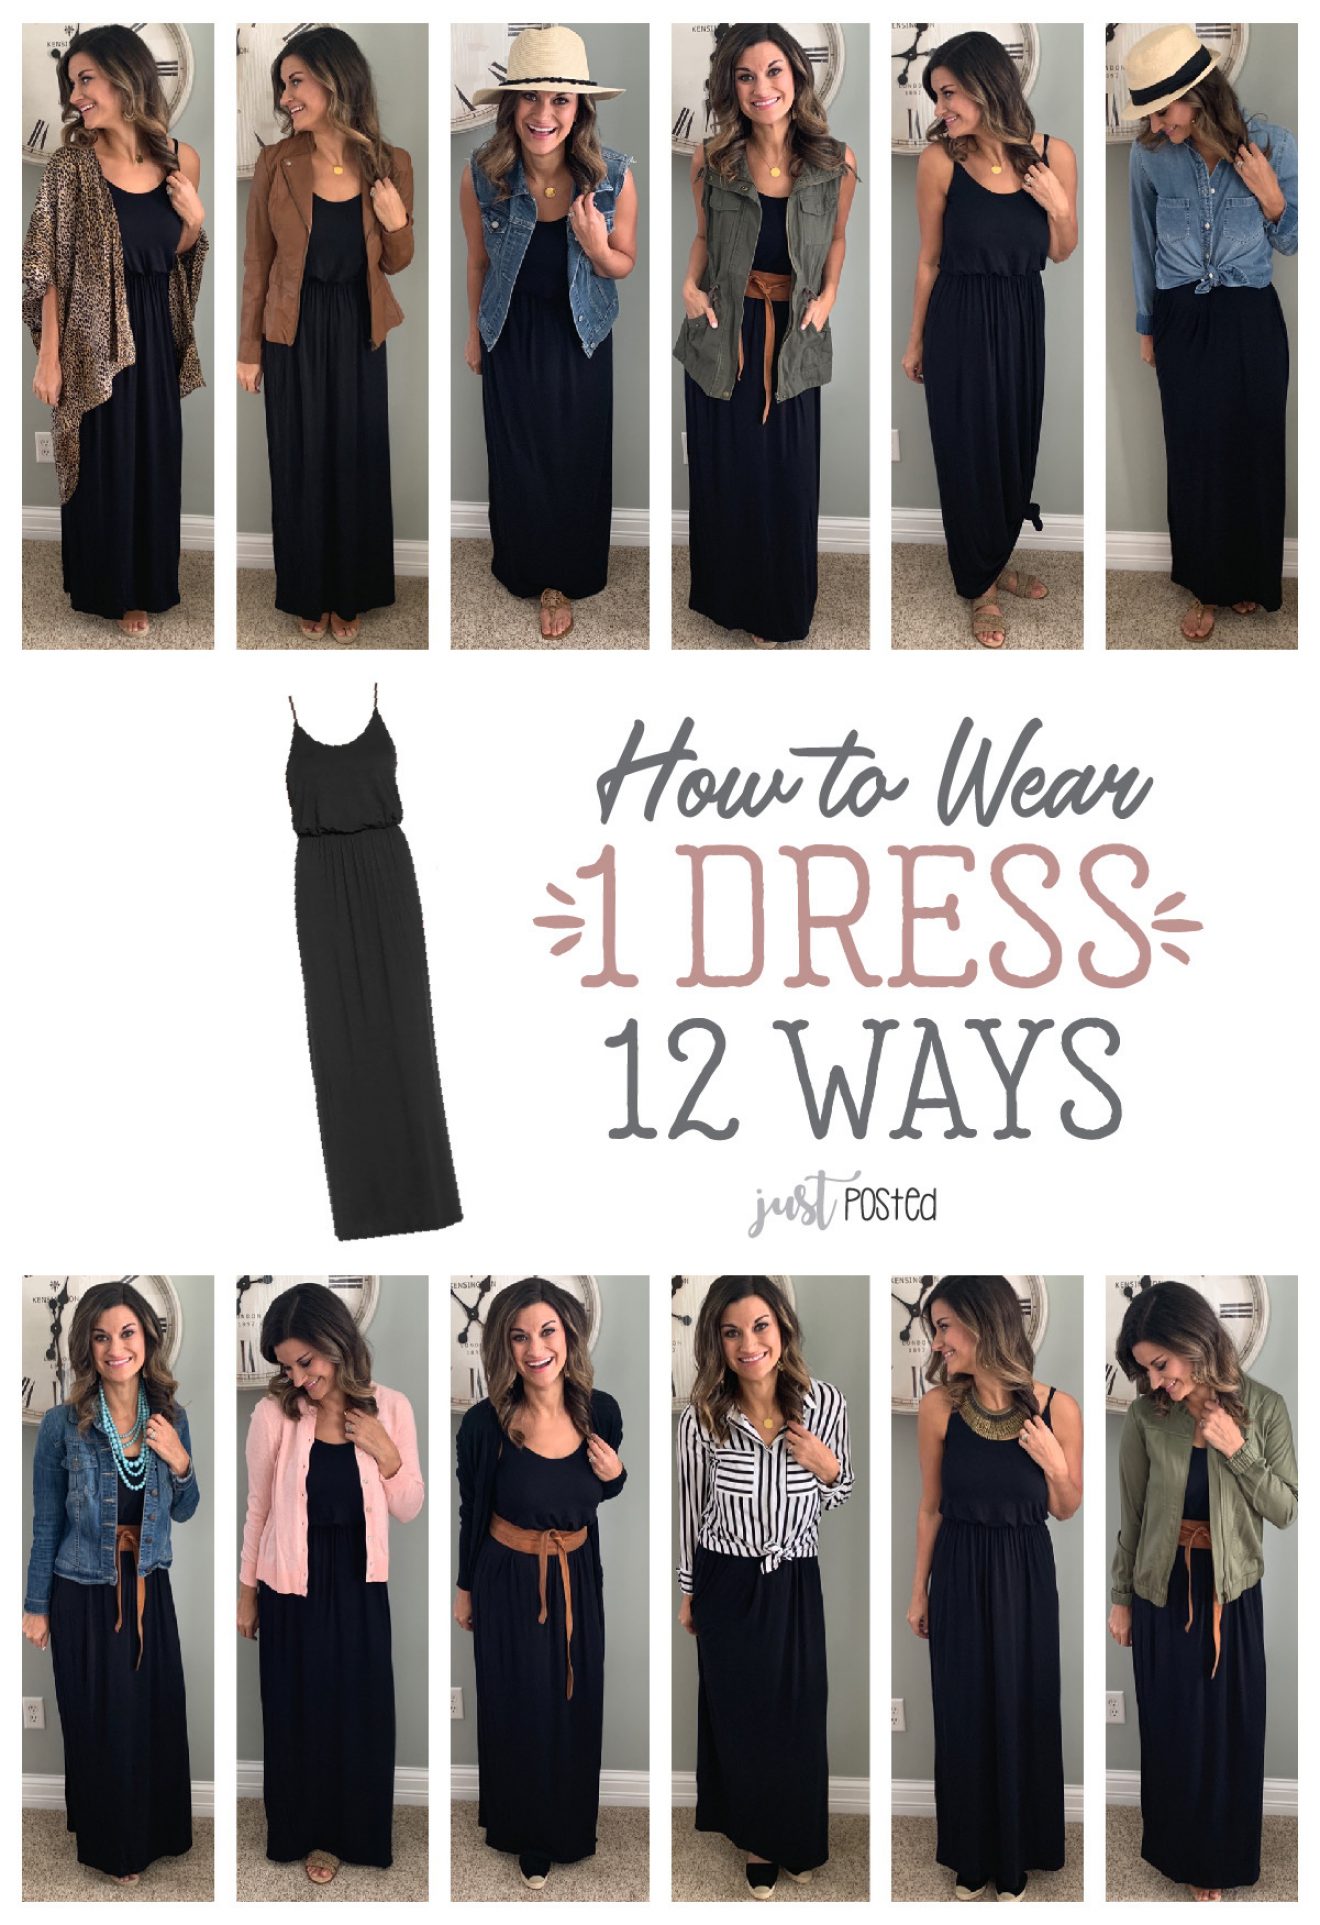 How to Wear One Black Maxi Dress Twelve Ways – Just Posted